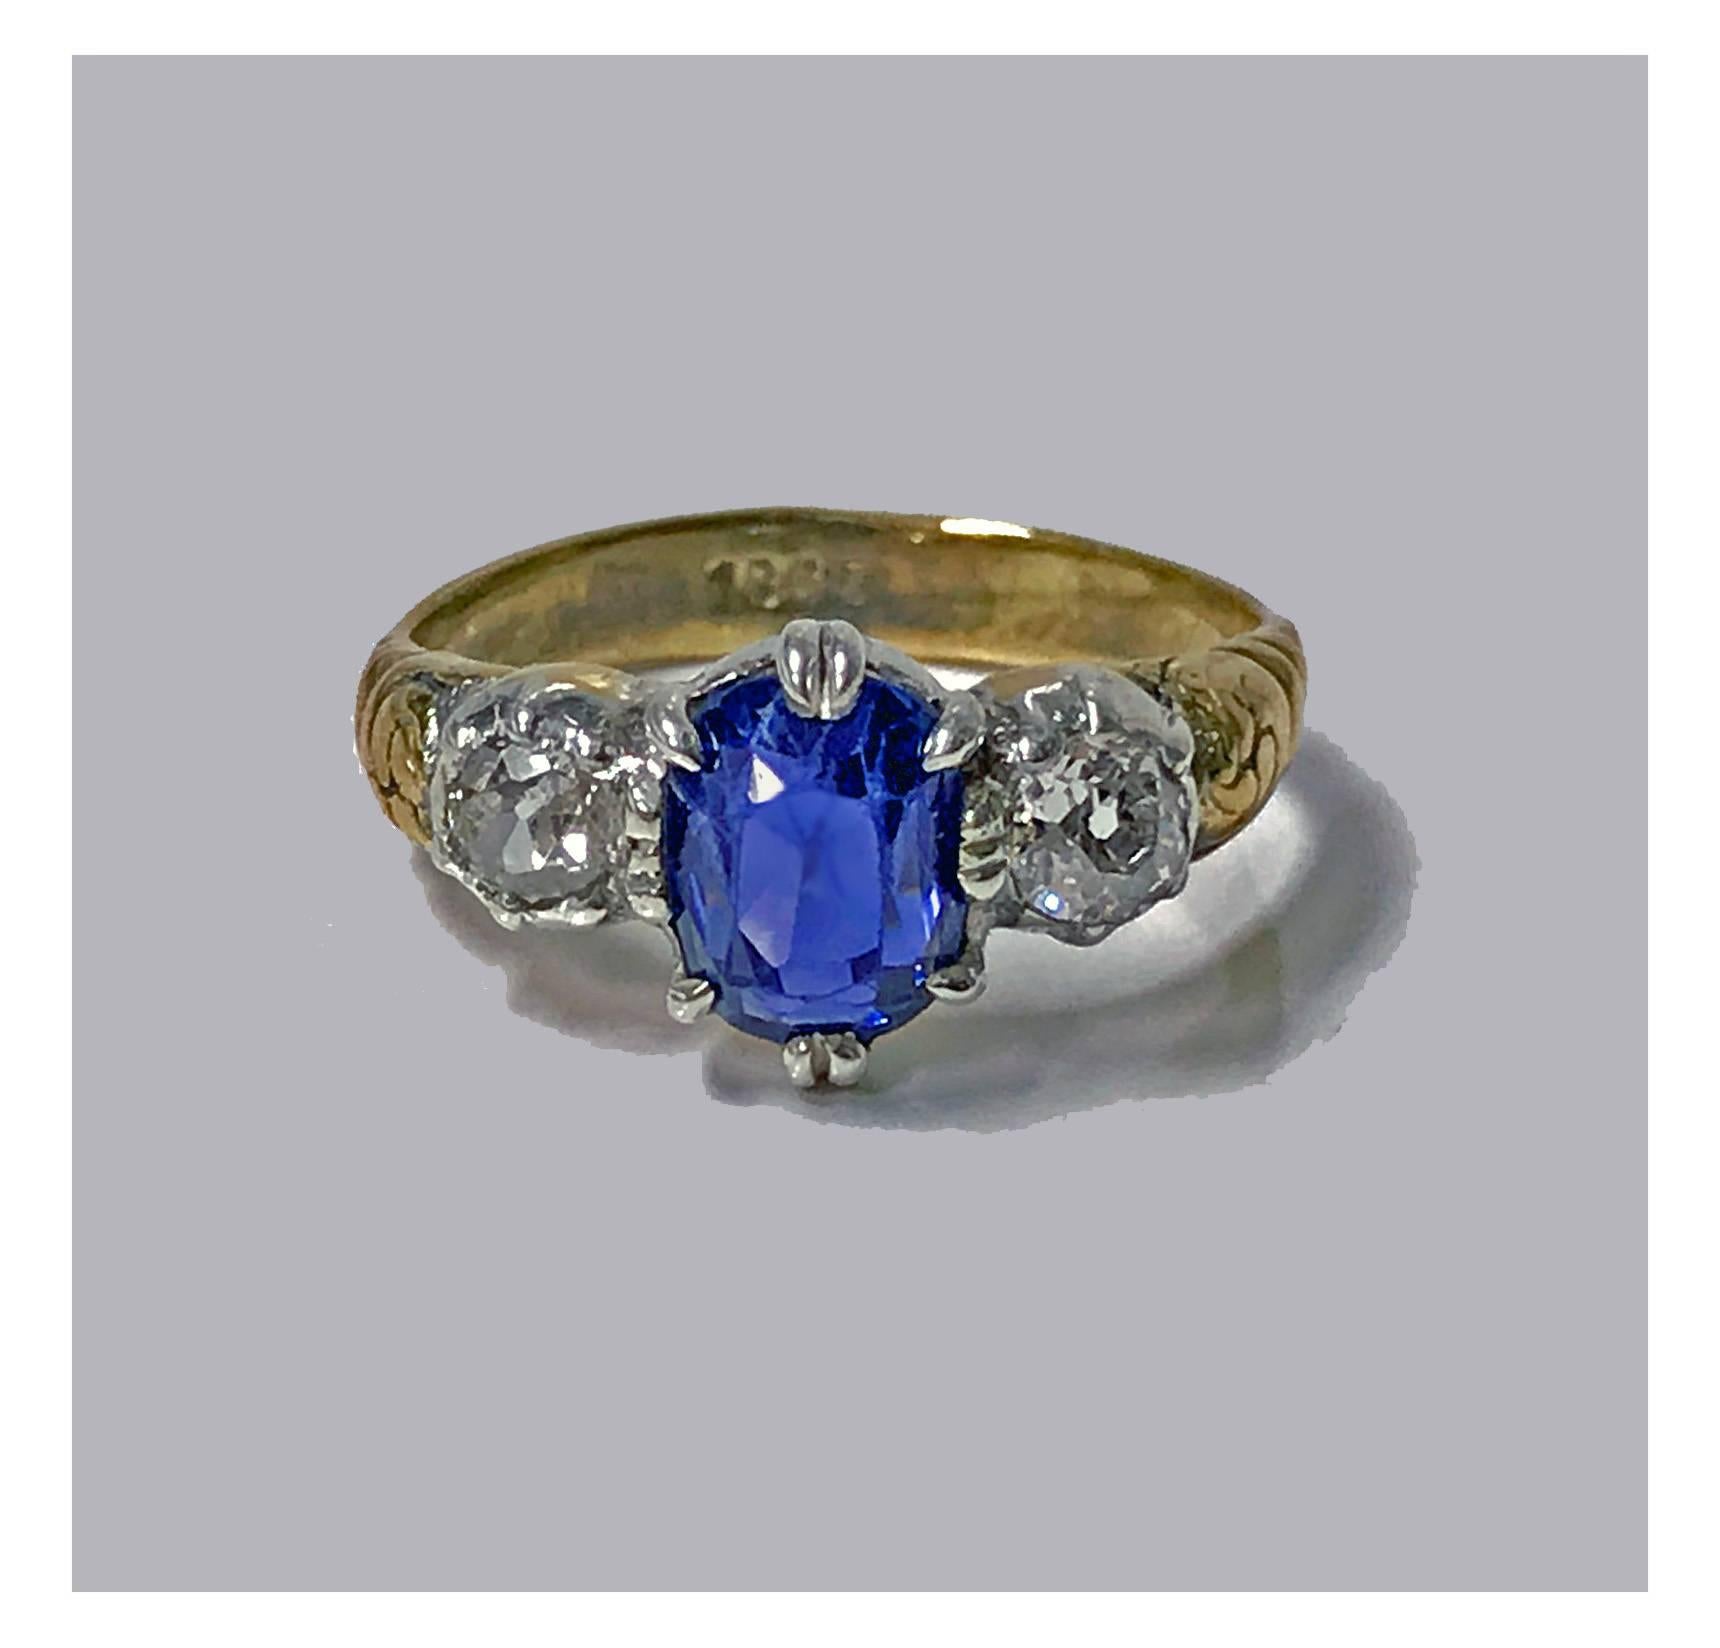 Antique 19th century 18K Sapphire and Diamond Ring, English C.1850. Oval Ceylon Sapphire approximately 2.30 ct, two old mine cut diamonds, Total Diamond Weight: approximately 0.50 ct, average VS2-SI1 clarity, average I-J colour. Total Item Weight: